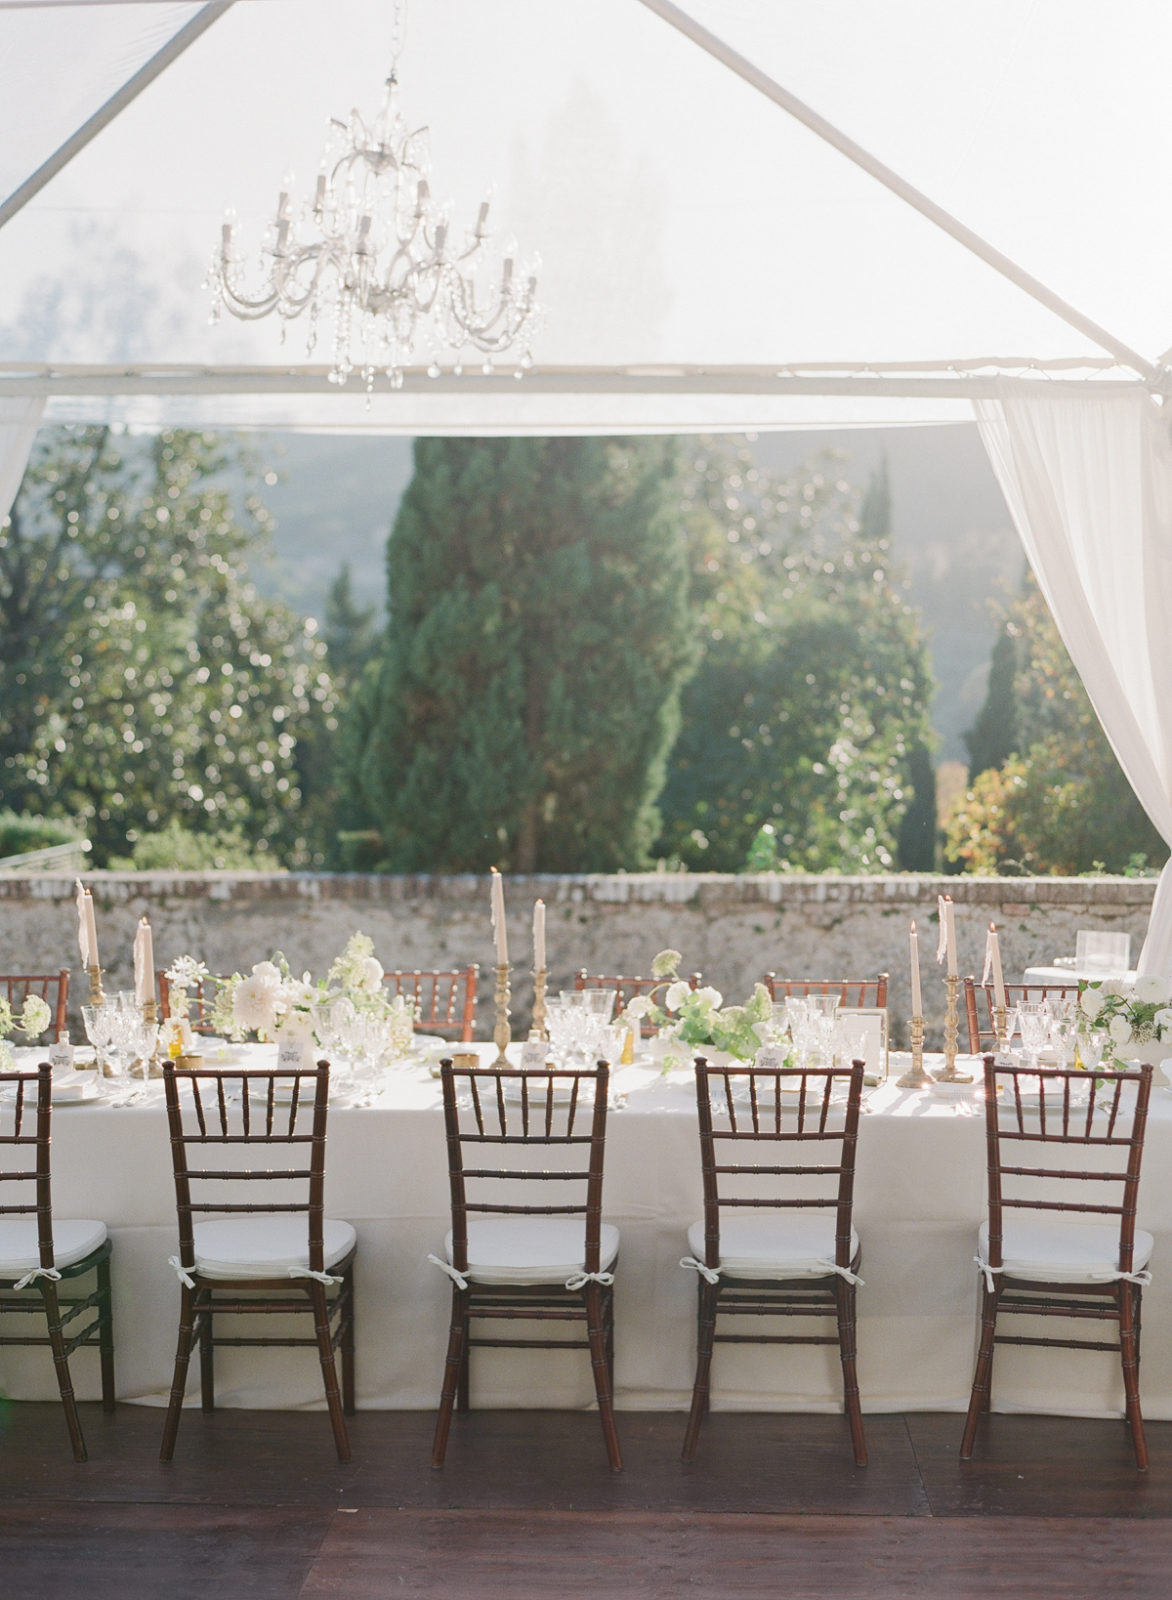 Villa Cetinale Wedding Photographer | Siena Wedding Venue | Tuscany Film Photographer | Italy Destination Wedding | Molly Carr Photography | White Wedding Reception with Clear Tent and Chandeliers